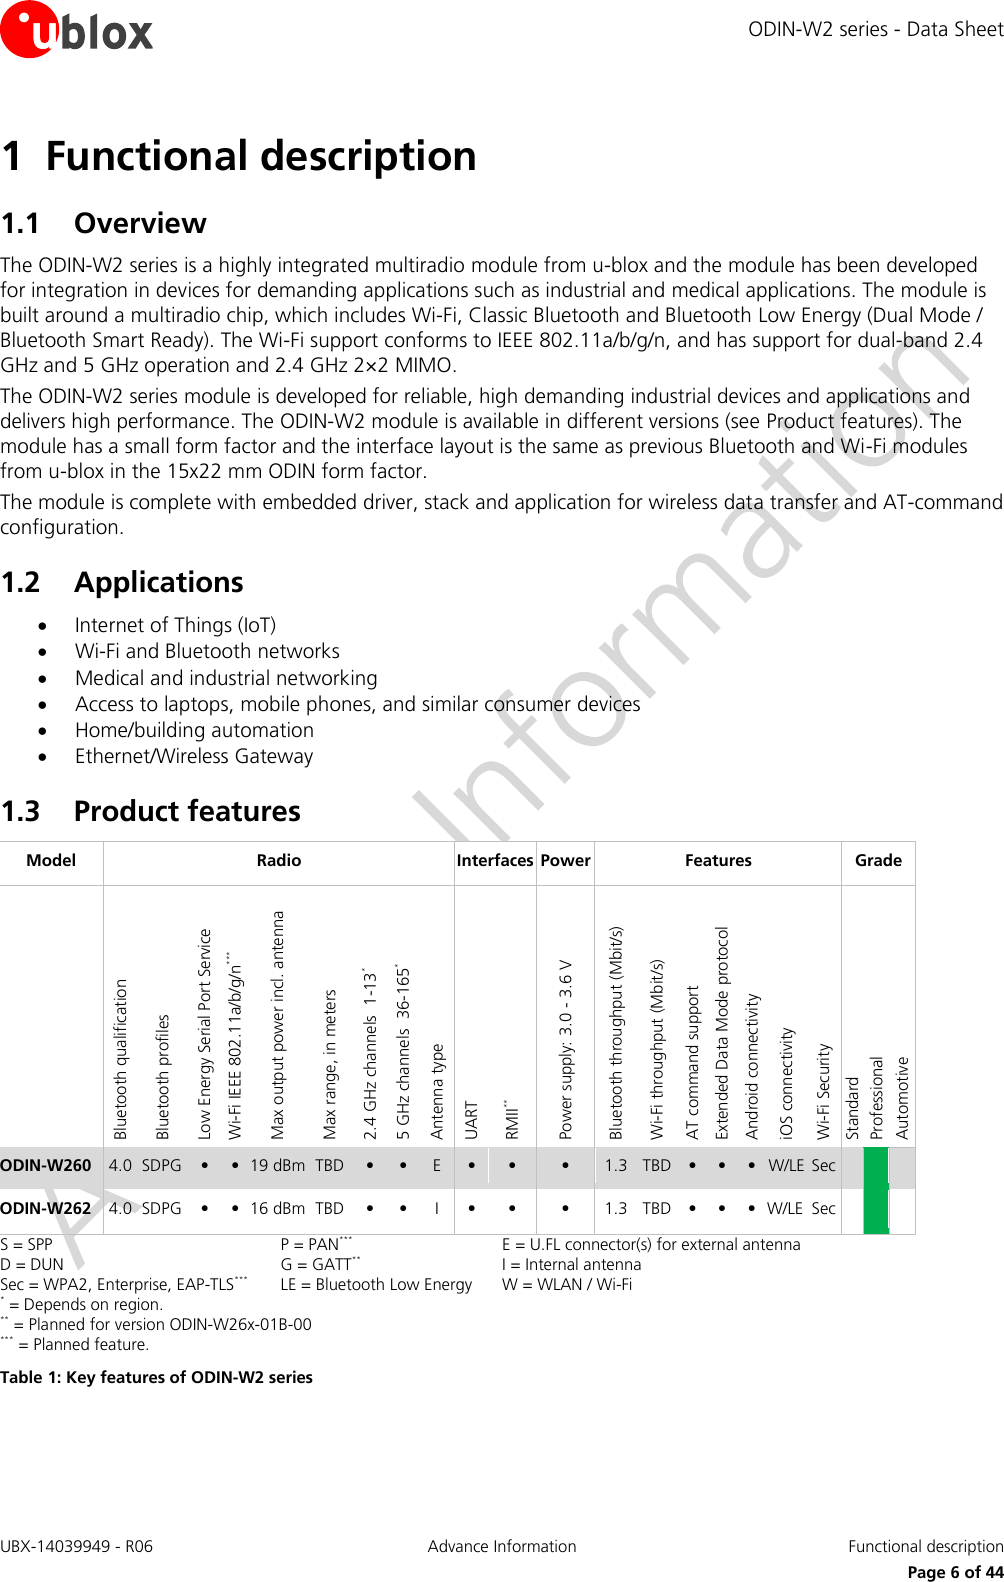 ODIN-W2 series - Data Sheet UBX-14039949 - R06 Advance Information  Functional description     Page 6 of 44 1 Functional description 1.1 Overview The ODIN-W2 series is a highly integrated multiradio module from u-blox and the module has been developed for integration in devices for demanding applications such as industrial and medical applications. The module is built around a multiradio chip, which includes Wi-Fi, Classic Bluetooth and Bluetooth Low Energy (Dual Mode / Bluetooth Smart Ready). The Wi-Fi support conforms to IEEE 802.11a/b/g/n, and has support for dual-band 2.4 GHz and 5 GHz operation and 2.4 GHz 2×2 MIMO.  The ODIN-W2 series module is developed for reliable, high demanding industrial devices and applications and delivers high performance. The ODIN-W2 module is available in different versions (see Product features). The module has a small form factor and the interface layout is the same as previous Bluetooth and Wi-Fi modules from u-blox in the 15x22 mm ODIN form factor. The module is complete with embedded driver, stack and application for wireless data transfer and AT-command configuration. 1.2 Applications  Internet of Things (IoT)  Wi-Fi and Bluetooth networks  Medical and industrial networking  Access to laptops, mobile phones, and similar consumer devices  Home/building automation   Ethernet/Wireless Gateway 1.3 Product features Model Radio Interfaces Power Features Grade  Bluetooth qualification Bluetooth profiles Low Energy Serial Port Service Wi-Fi IEEE 802.11a/b/g/n*** Max output power incl. antenna Max range, in meters 2.4 GHz channels  1-13* 5 GHz channels  36-165* Antenna type UART RMII** Power supply: 3.0 - 3.6 V Bluetooth throughput (Mbit/s) Wi-Fi throughput (Mbit/s) AT command support Extended Data Mode protocol Android connectivity iOS connectivity Wi-Fi Security Standard Professional Automotive ODIN-W260 4.0  SDPG • • 19 dBm TBD • • E • • • 1.3 TBD • • • W/LE Sec    ODIN-W262 4.0  SDPG • • 16 dBm TBD • • I • • • 1.3 TBD • • • W/LE Sec    S = SPP  P = PAN***  E = U.FL connector(s) for external antenna D = DUN  G = GATT**  I = Internal antenna Sec = WPA2, Enterprise, EAP-TLS***  LE = Bluetooth Low Energy  W = WLAN / Wi-Fi * = Depends on region. ** = Planned for version ODIN-W26x-01B-00 *** = Planned feature. Table 1: Key features of ODIN-W2 series 